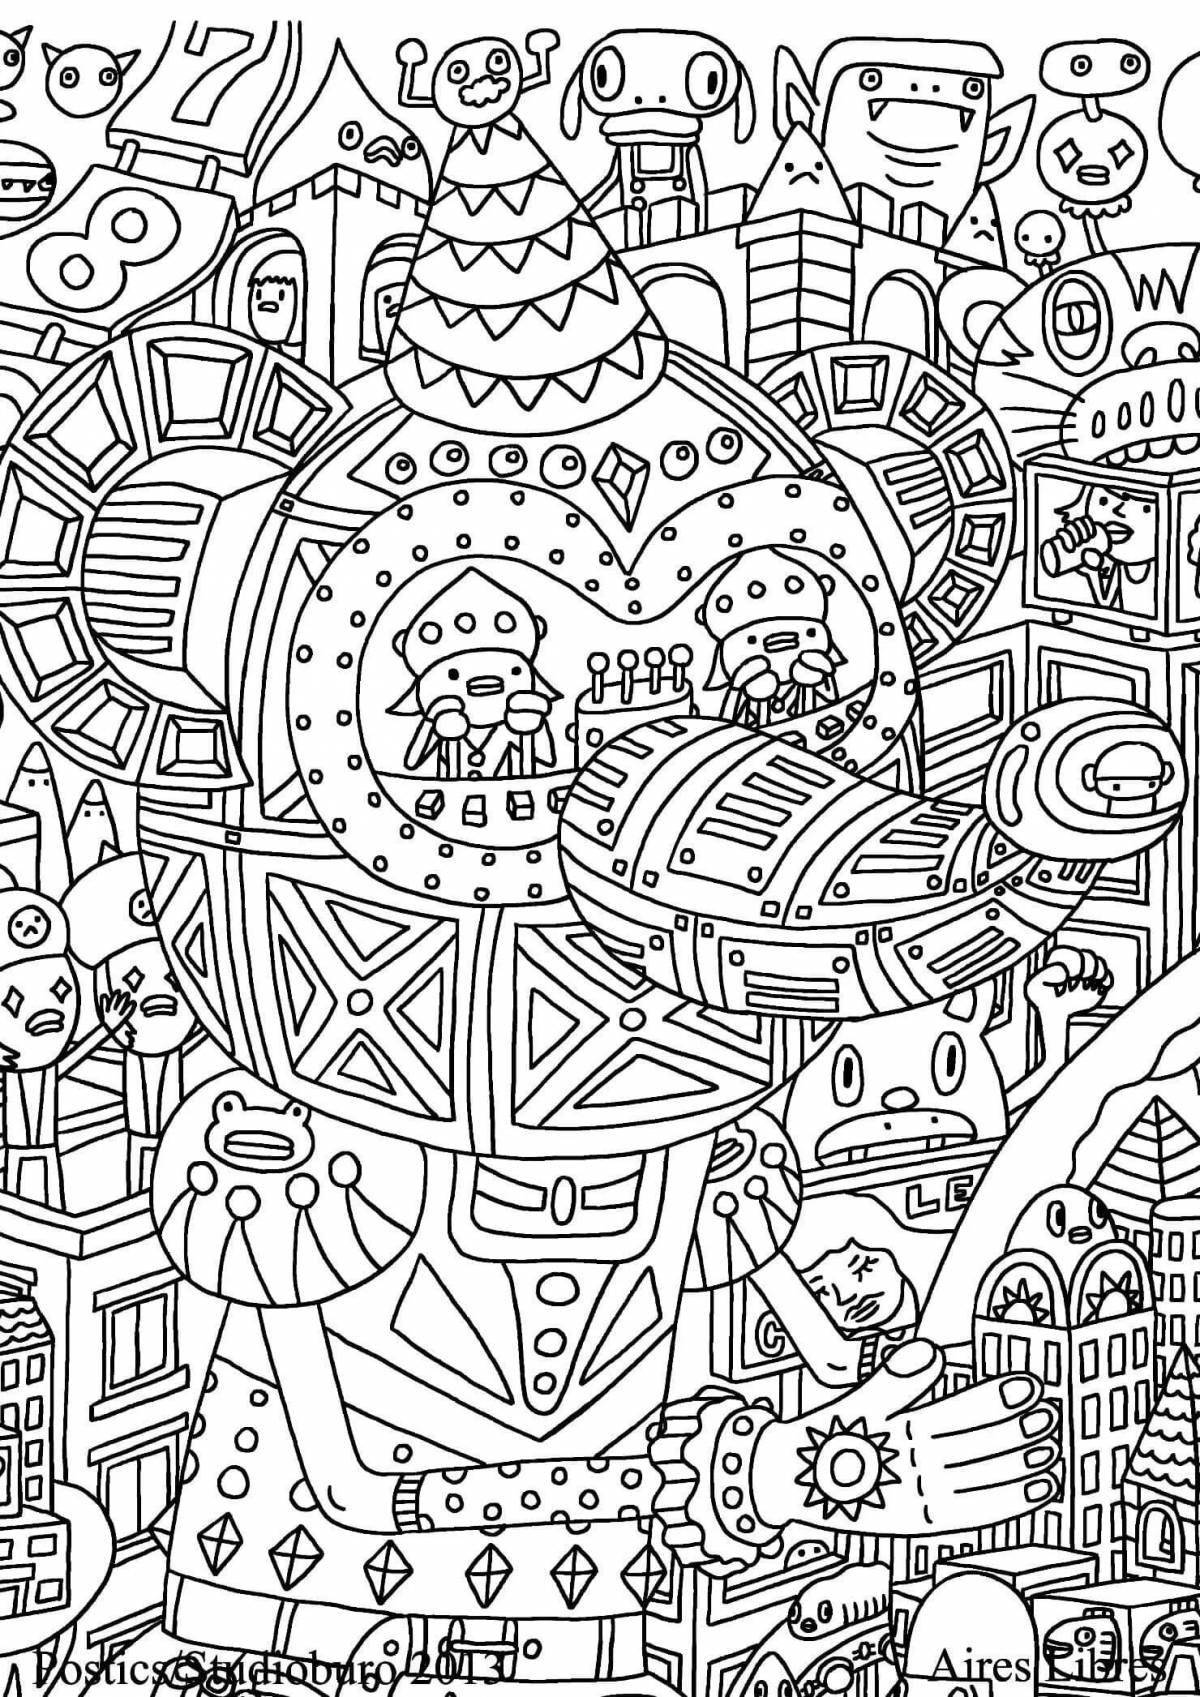 An invigorating anti-stress coloring book for teenagers